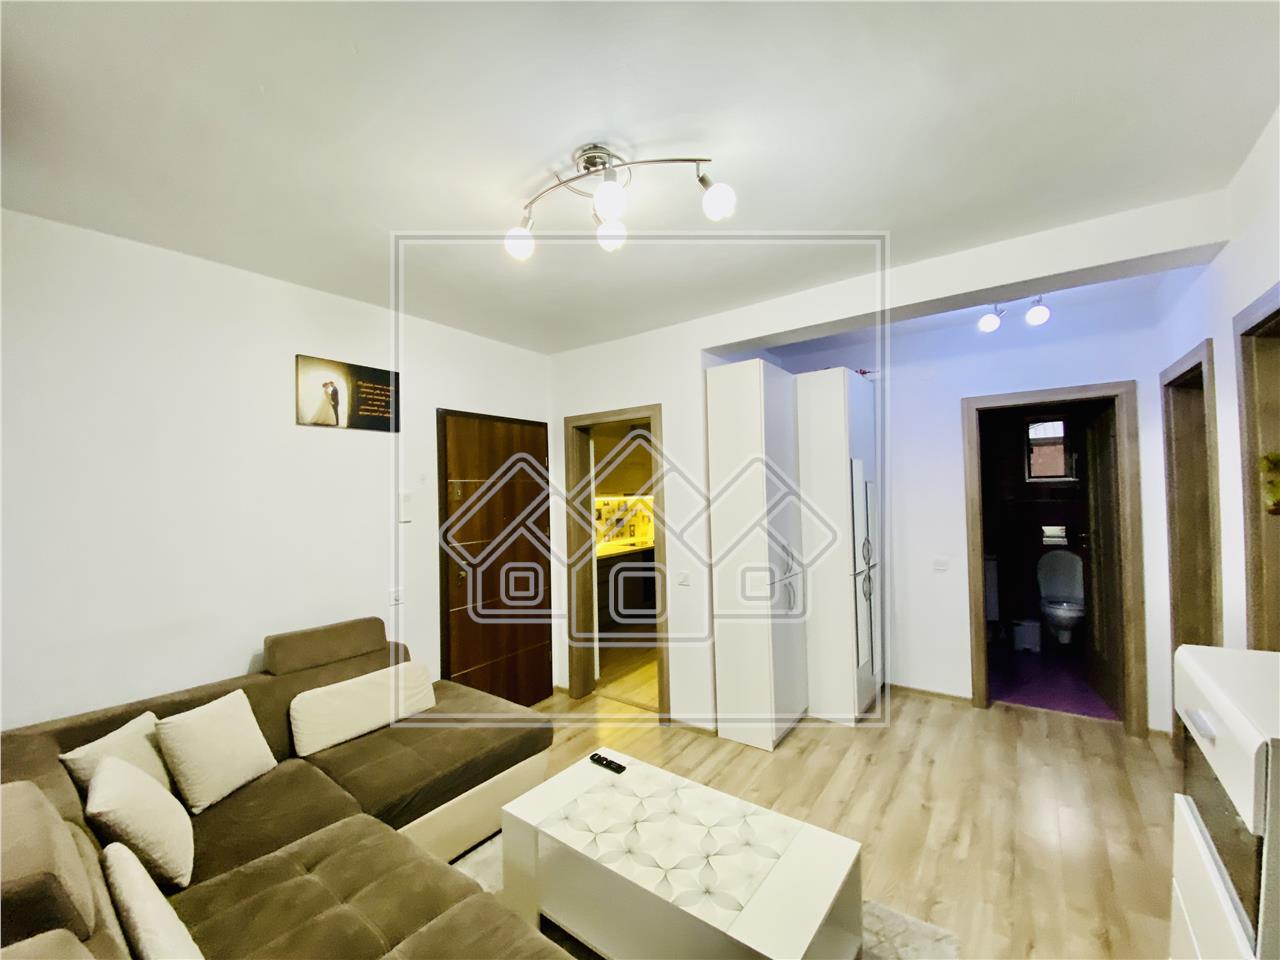 Apartment for sale in Sibiu - 3 rooms and garden - C. Architects